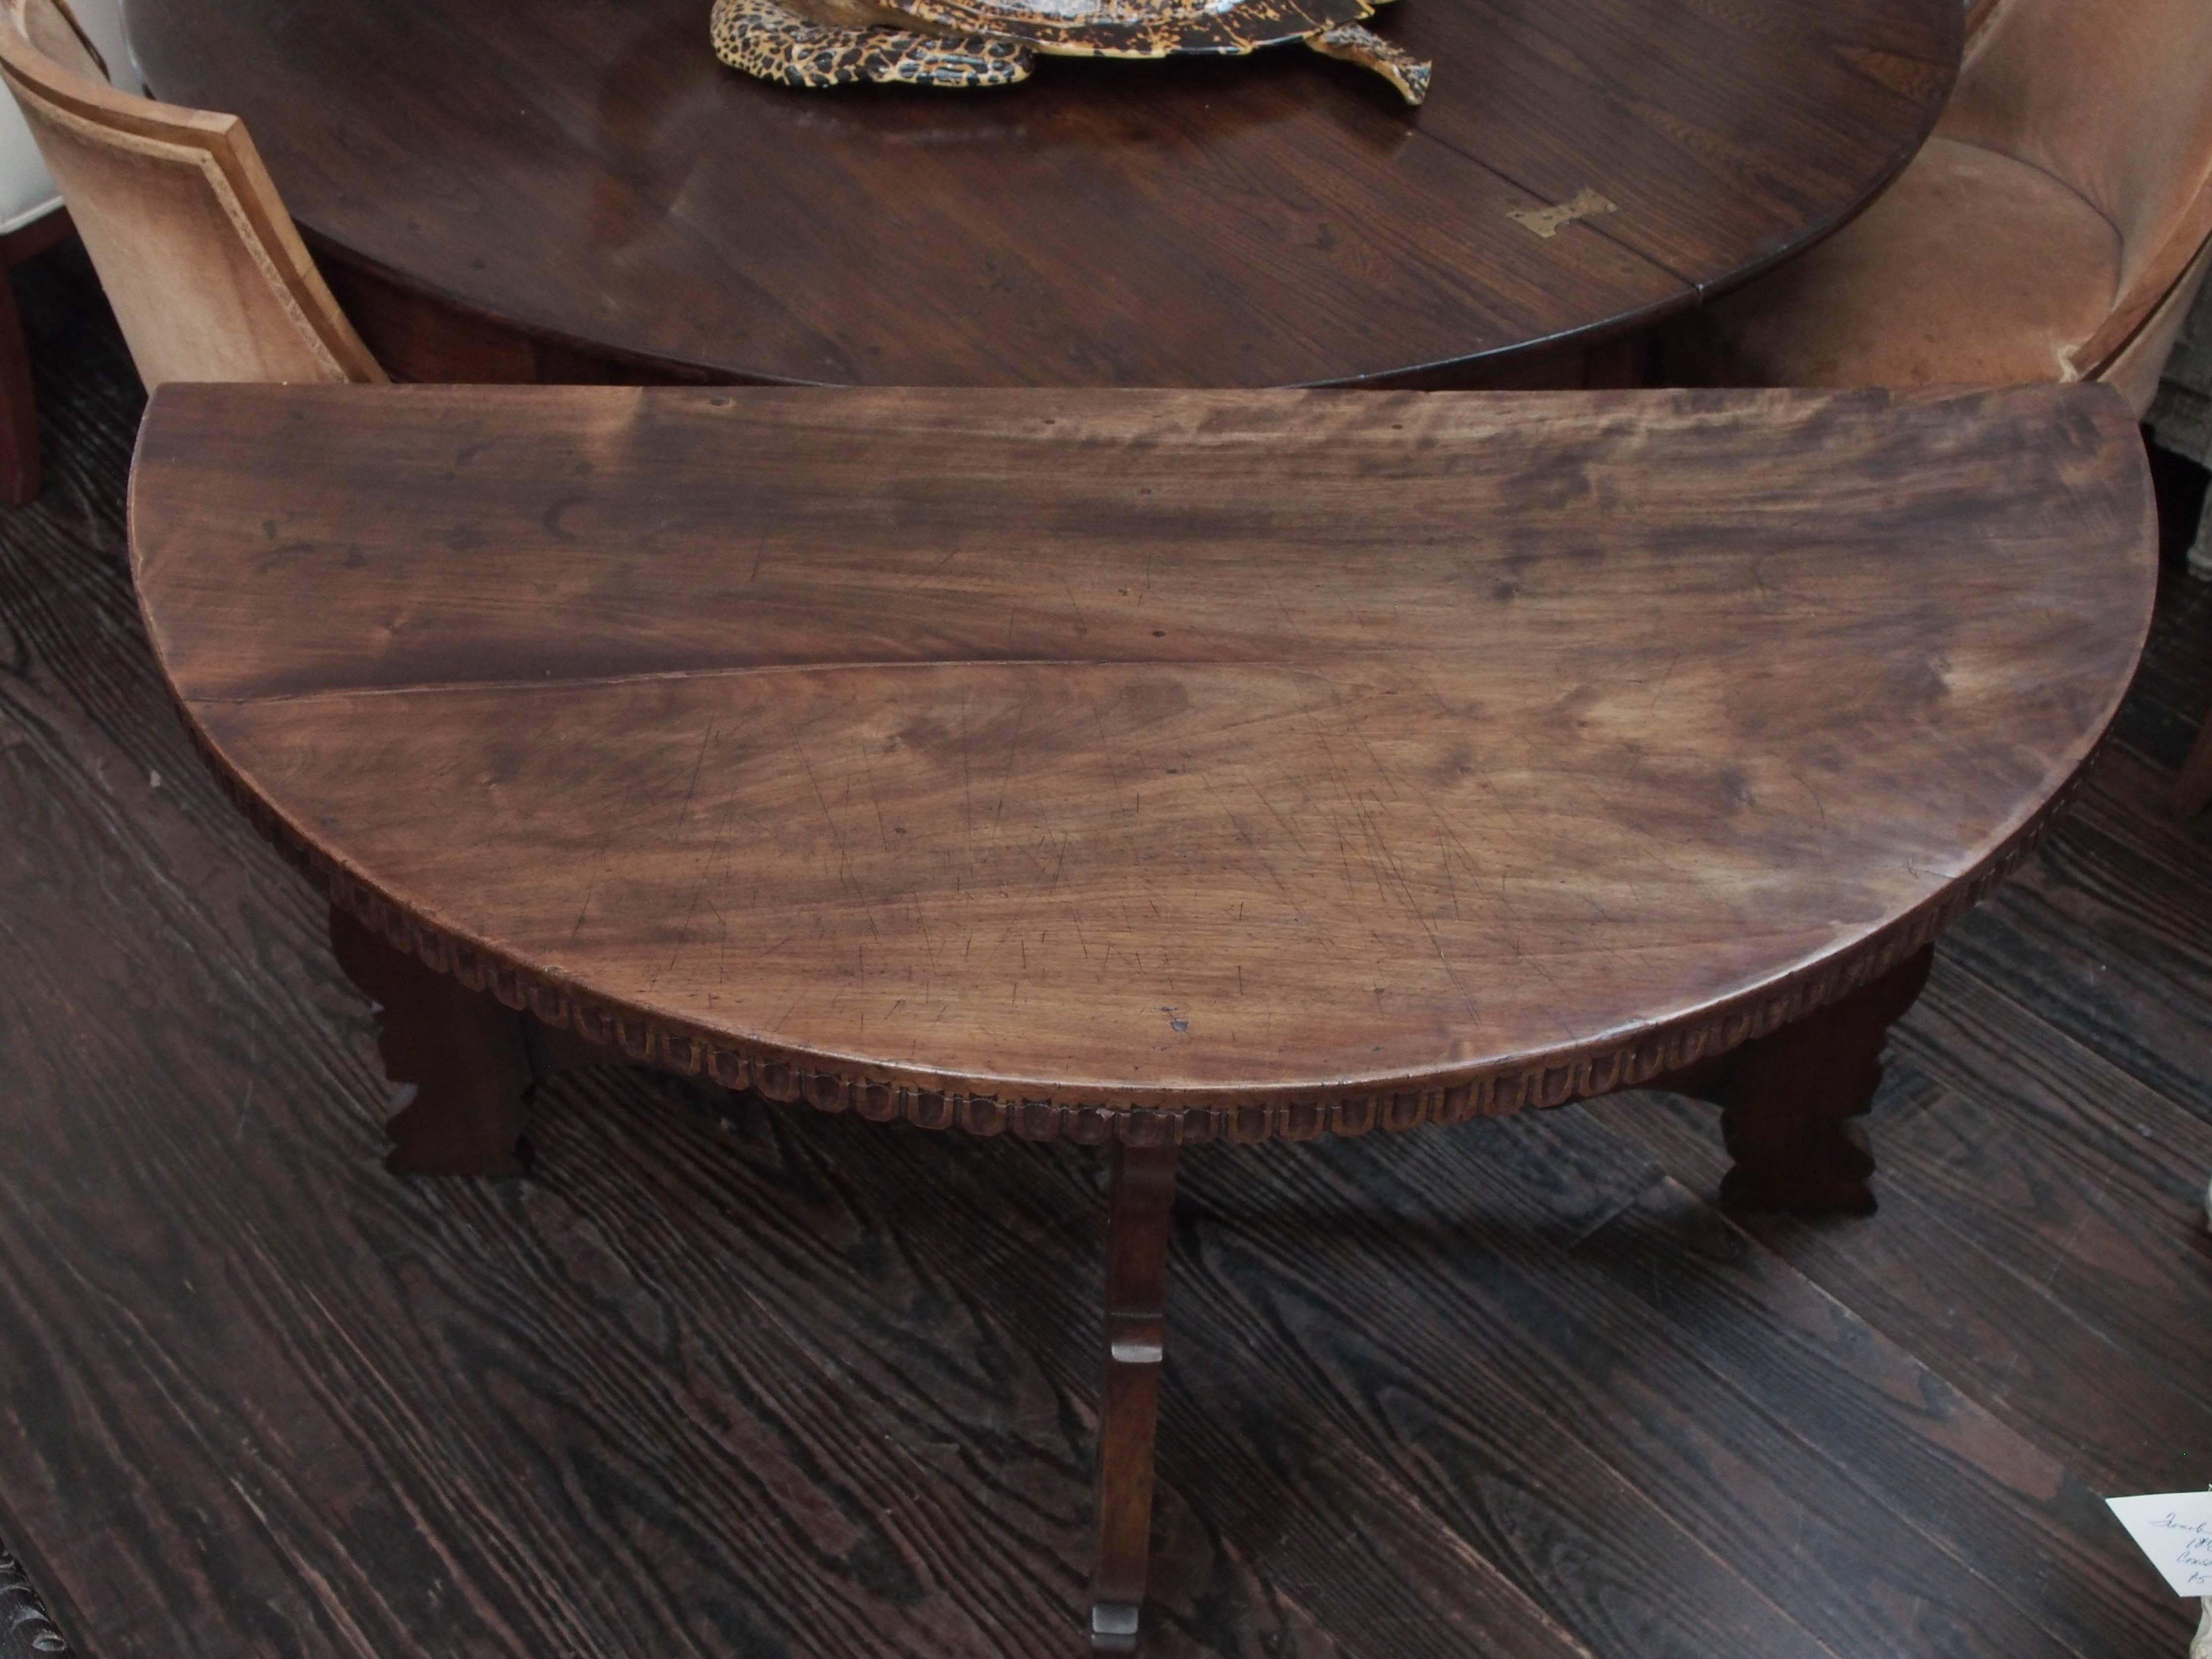 Top made of solid plank of walnut with a great patina.